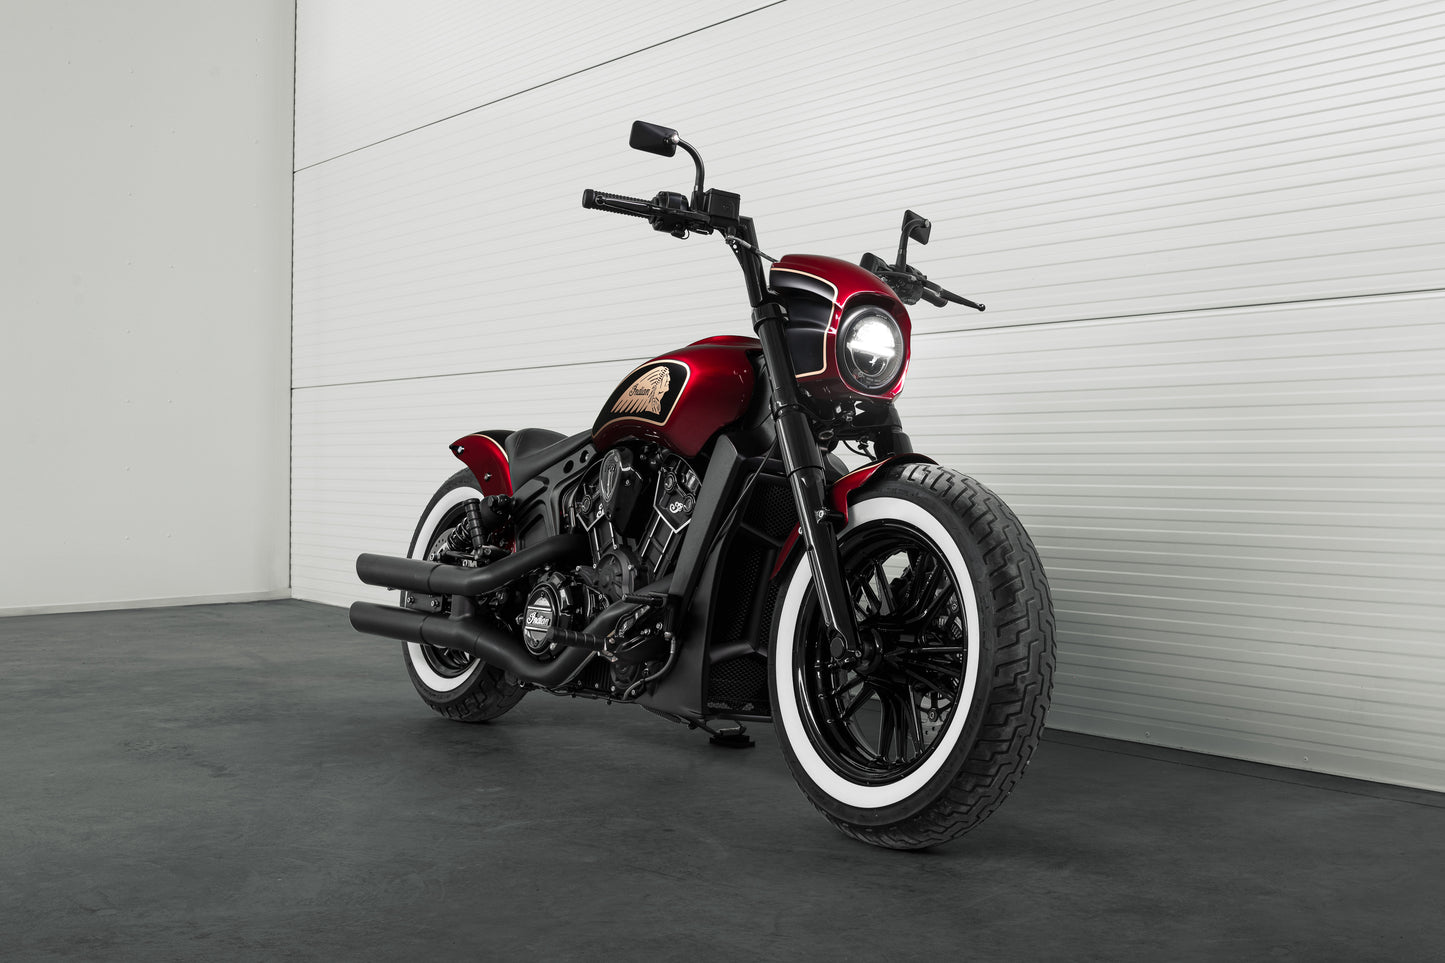 Harley Davidson motorcycle with Killer Custom "Tomahawk" full fork covers set from the side in a modern garage